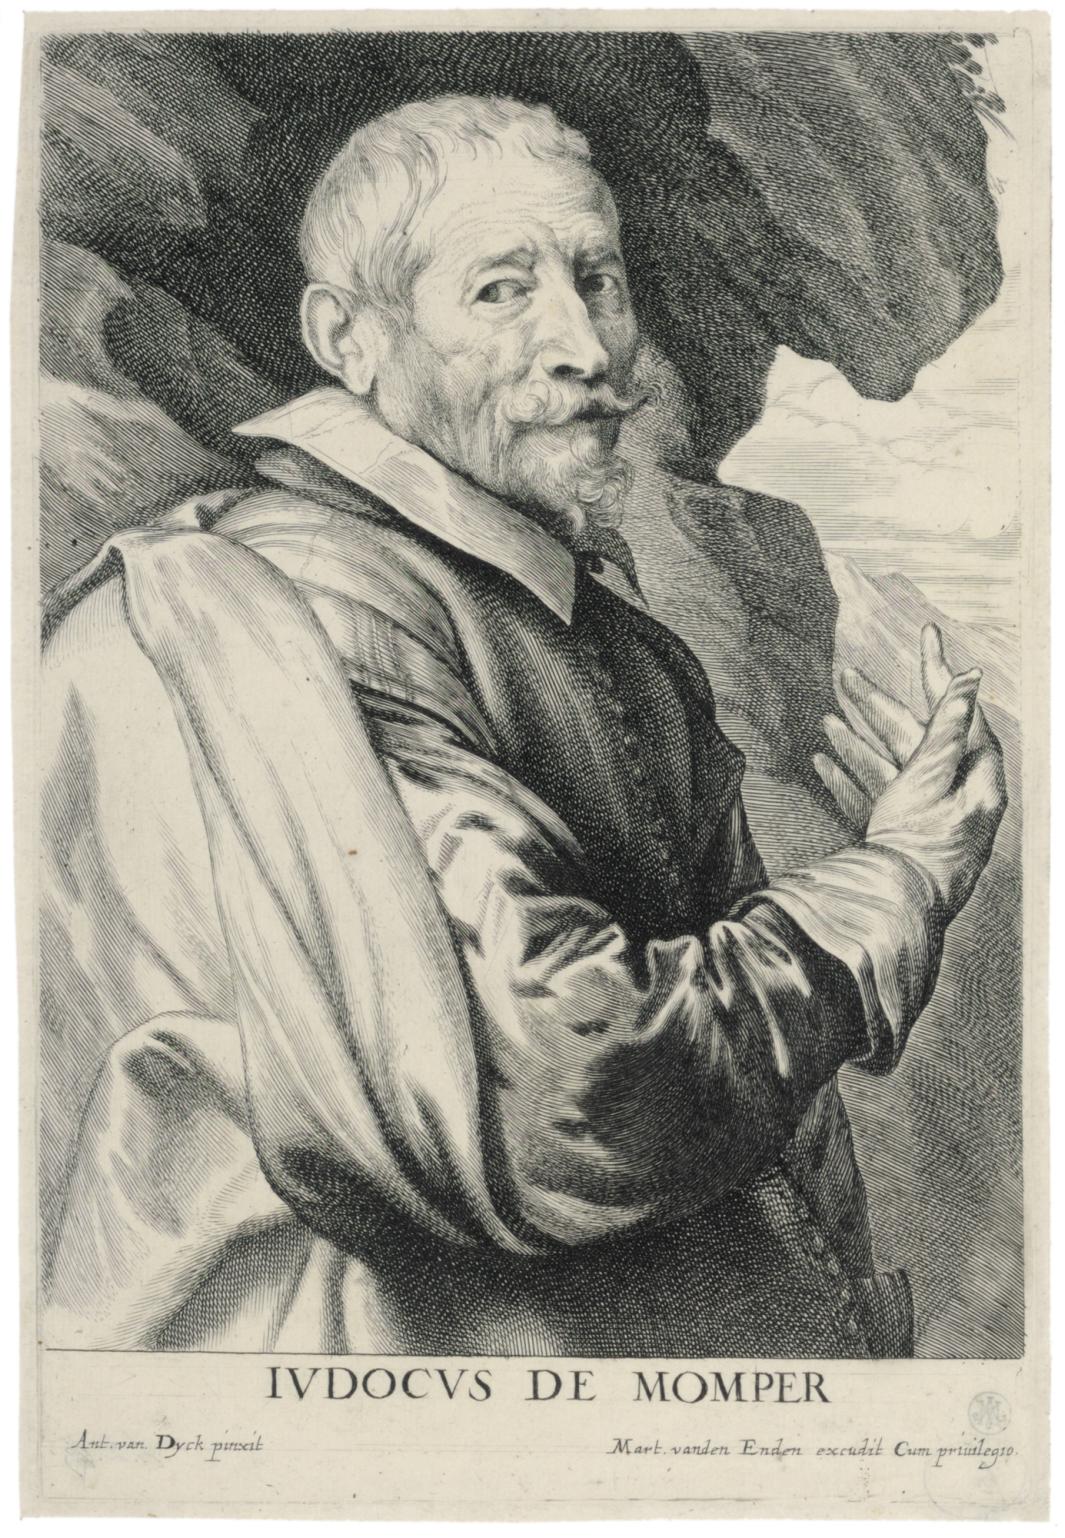 engraving of portrait of old man with draped clothing and gloved hand, with caption